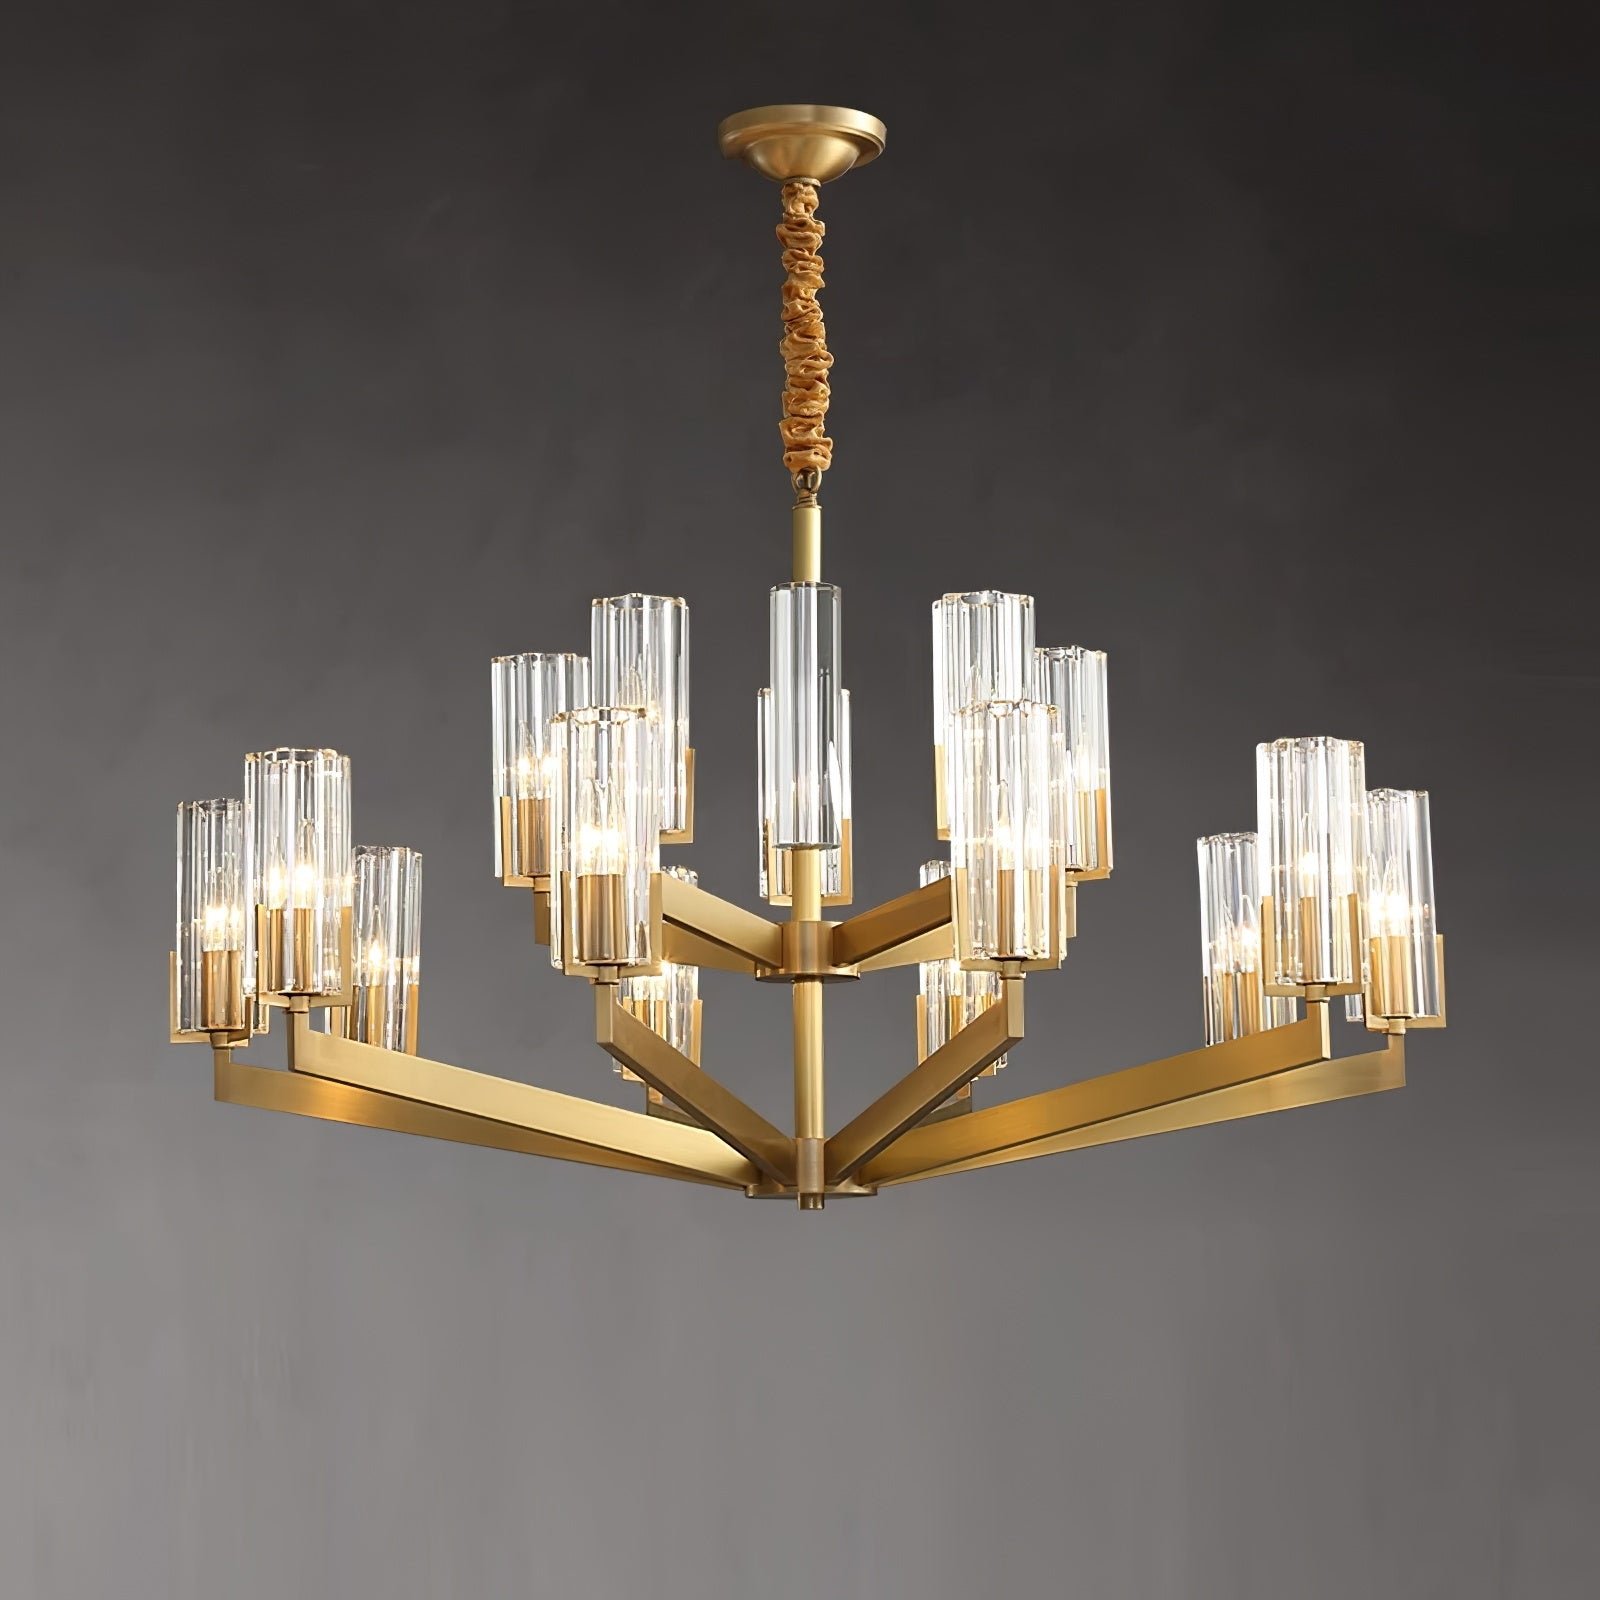 Chandelier with 15 Brass Heads, Diameter 37.4 inches and Height 22.4 inches (95cm x 57cm) in Clear